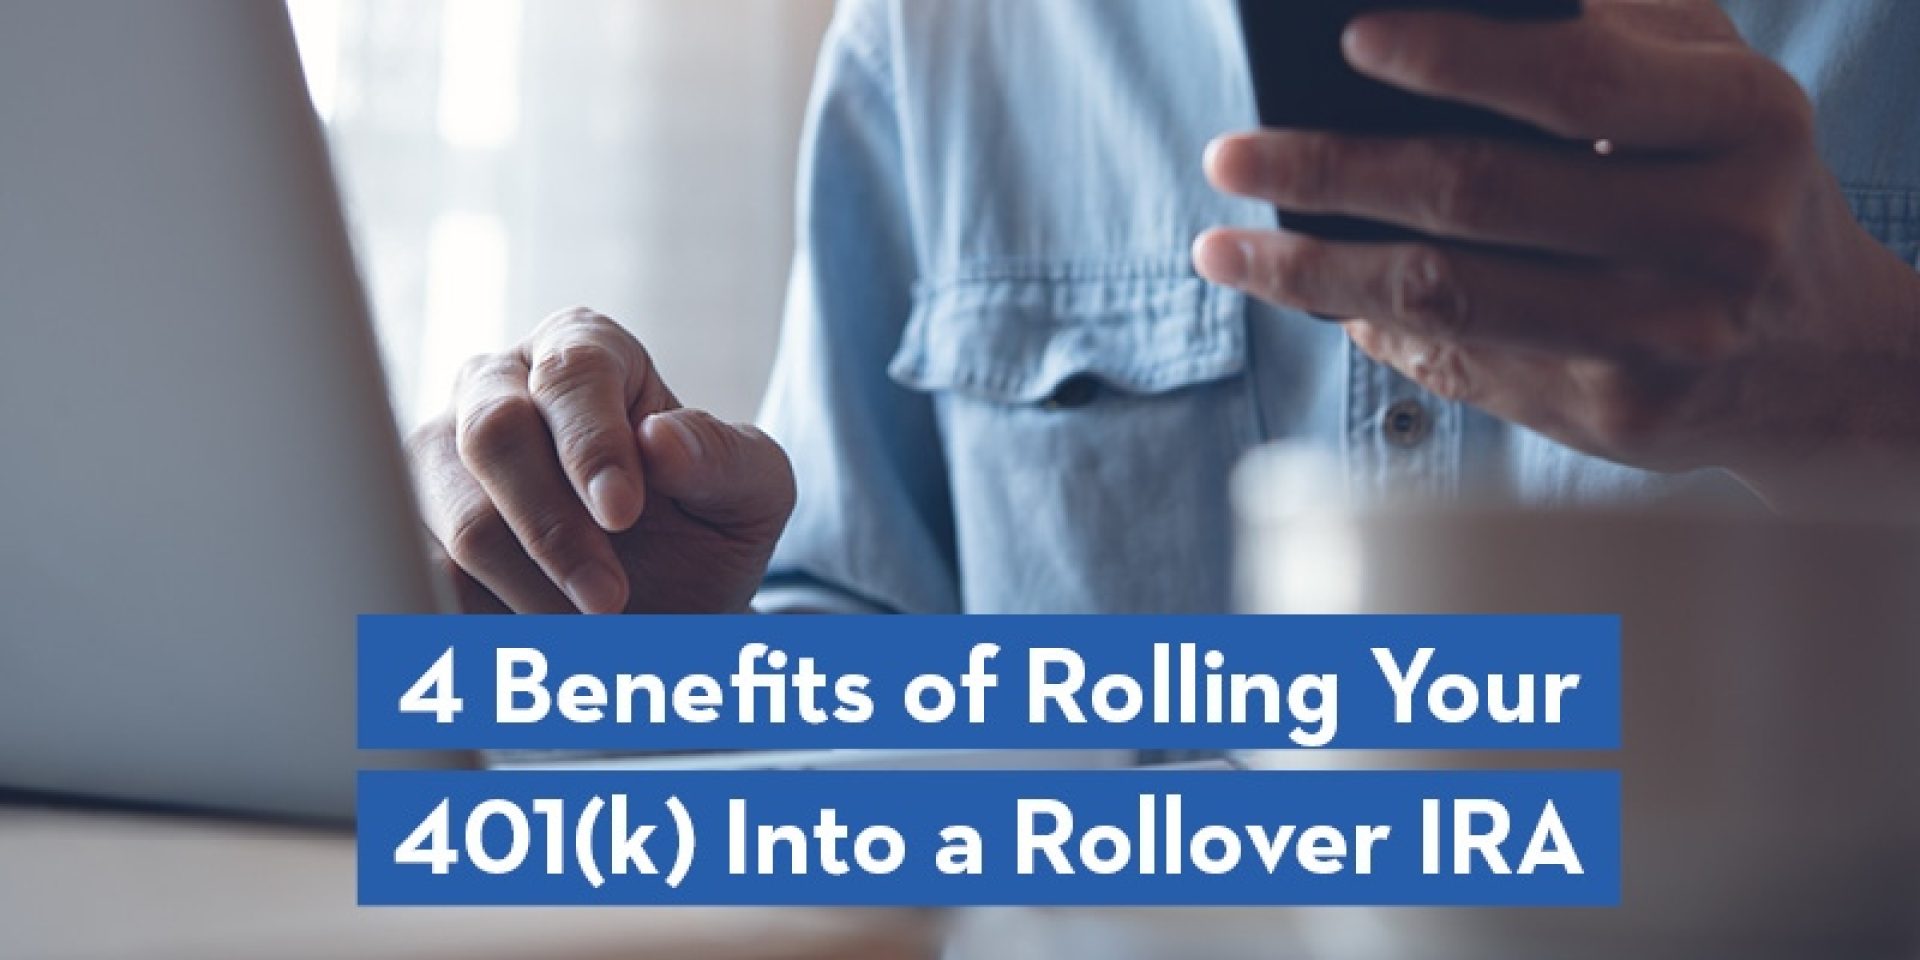 401(k) Rollover Options - The Facts